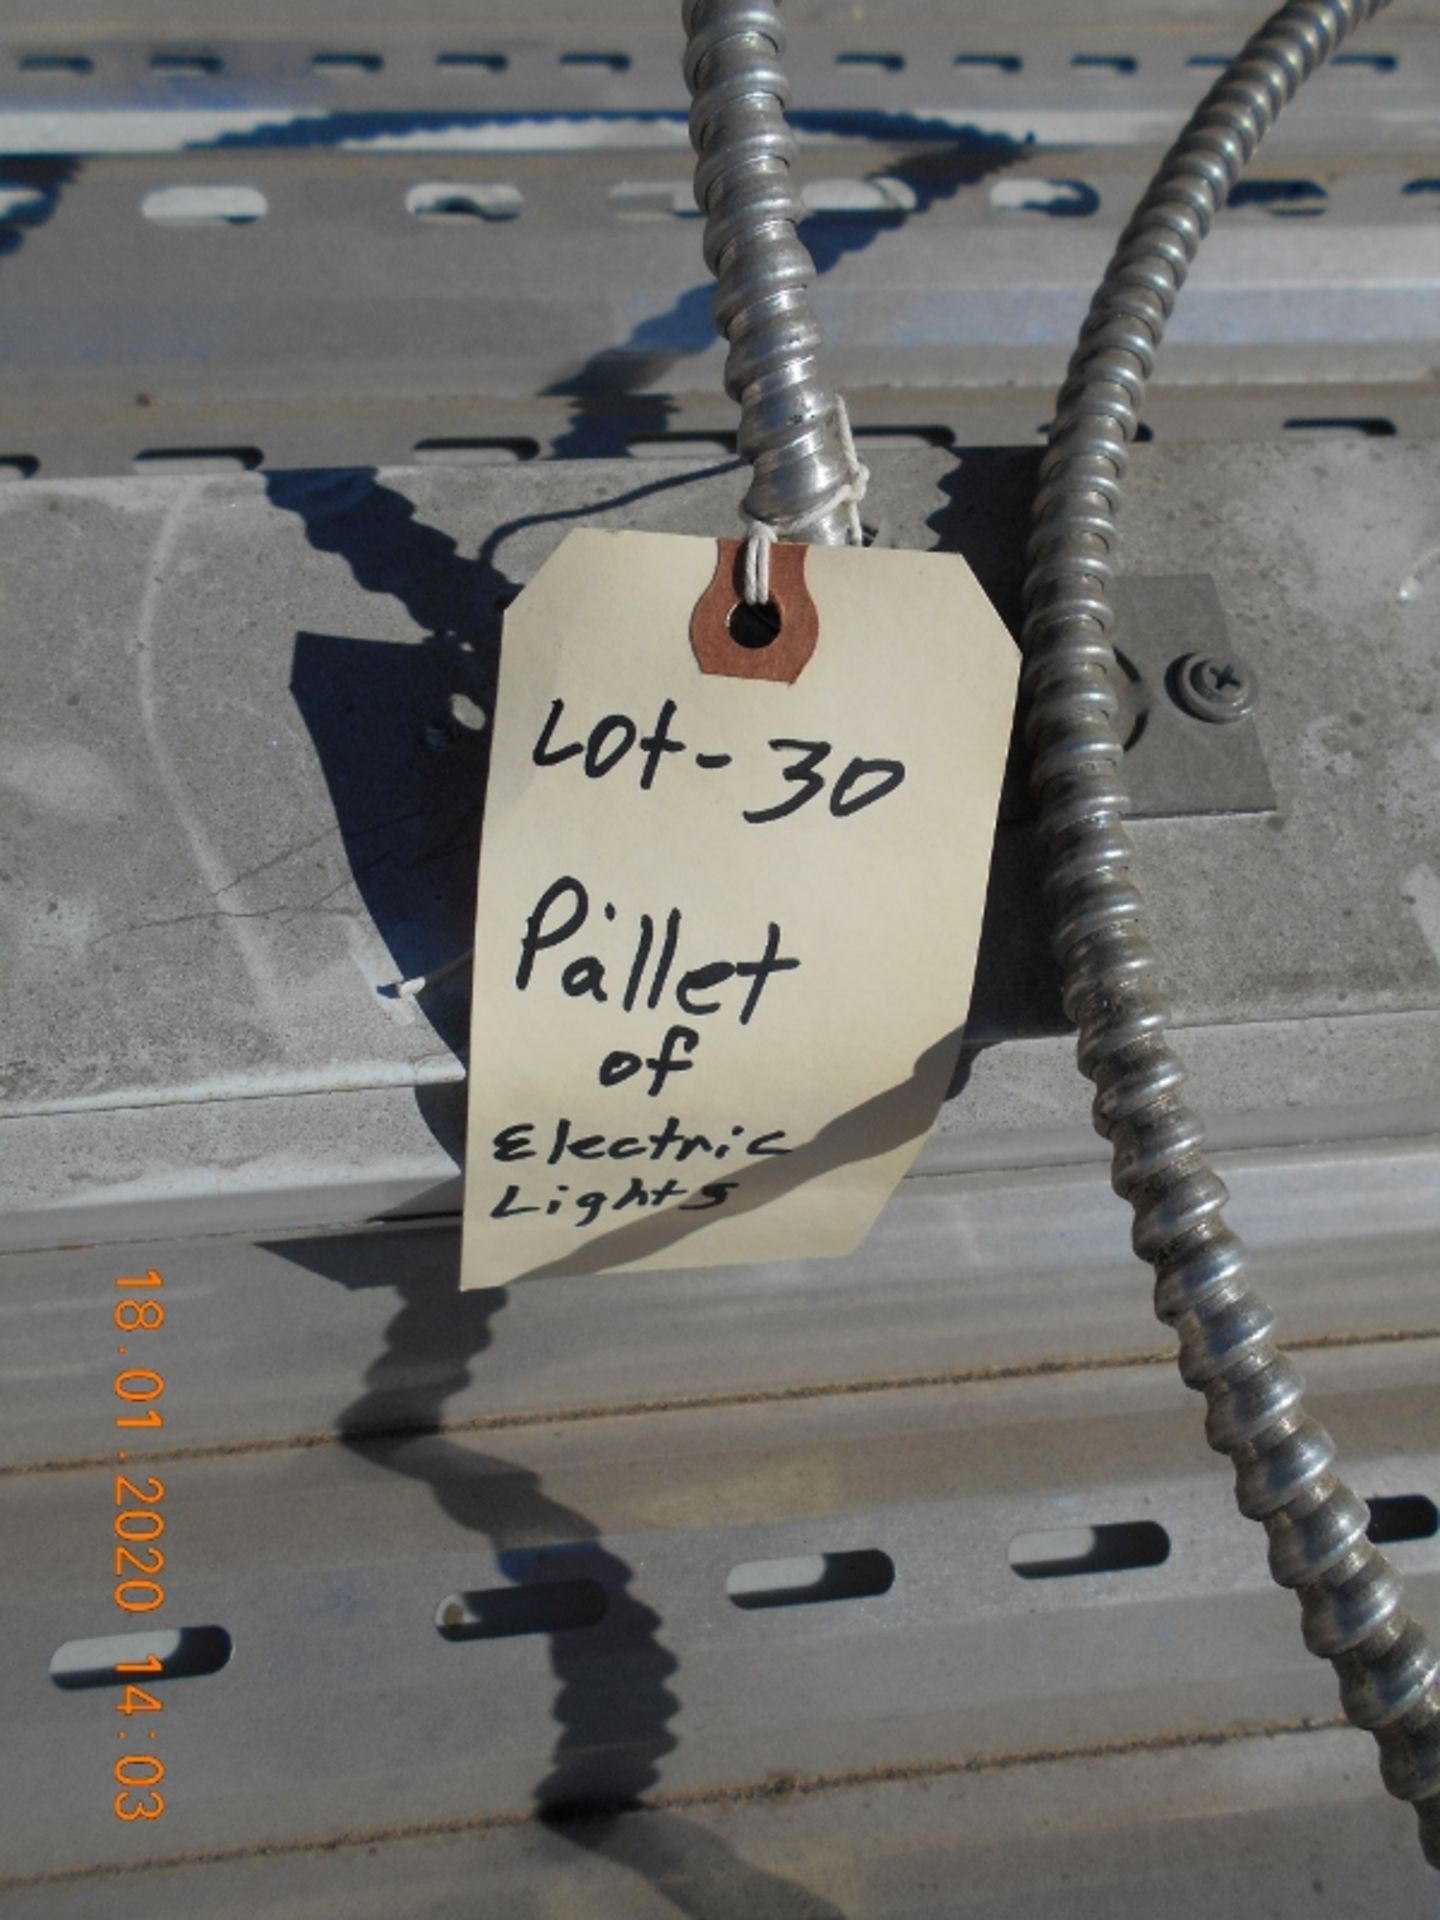 Pallet of Electric Lights - Image 2 of 4